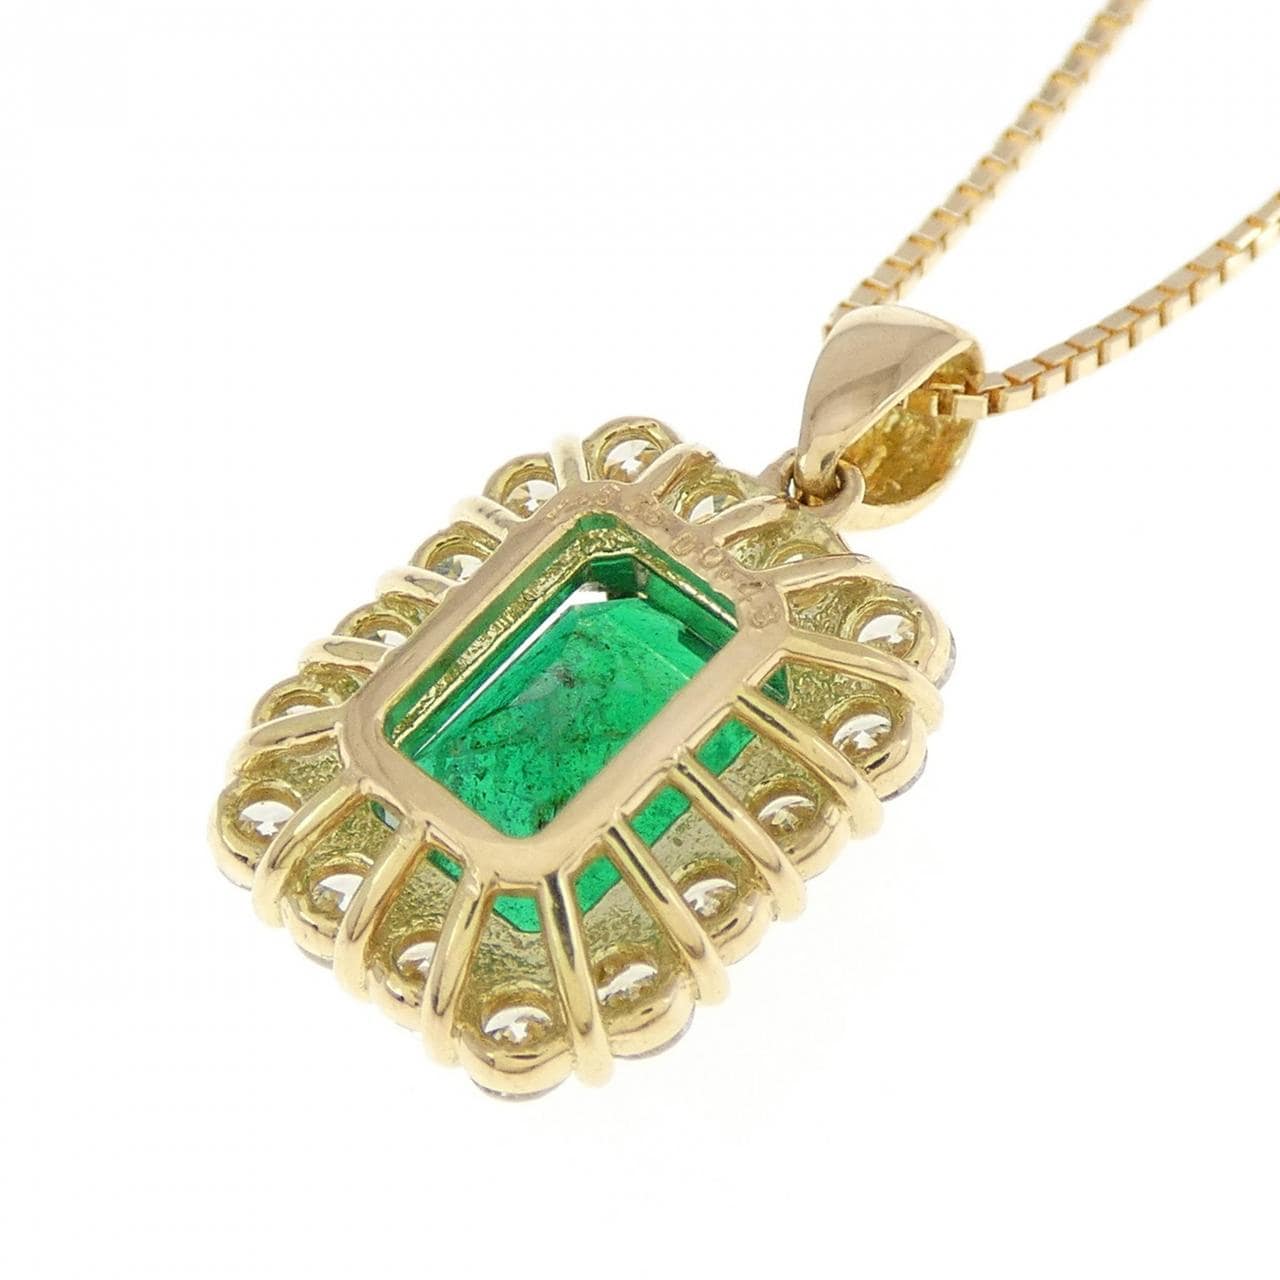 [Remake] K18YG emerald necklace 1.575CT Made in Zambia